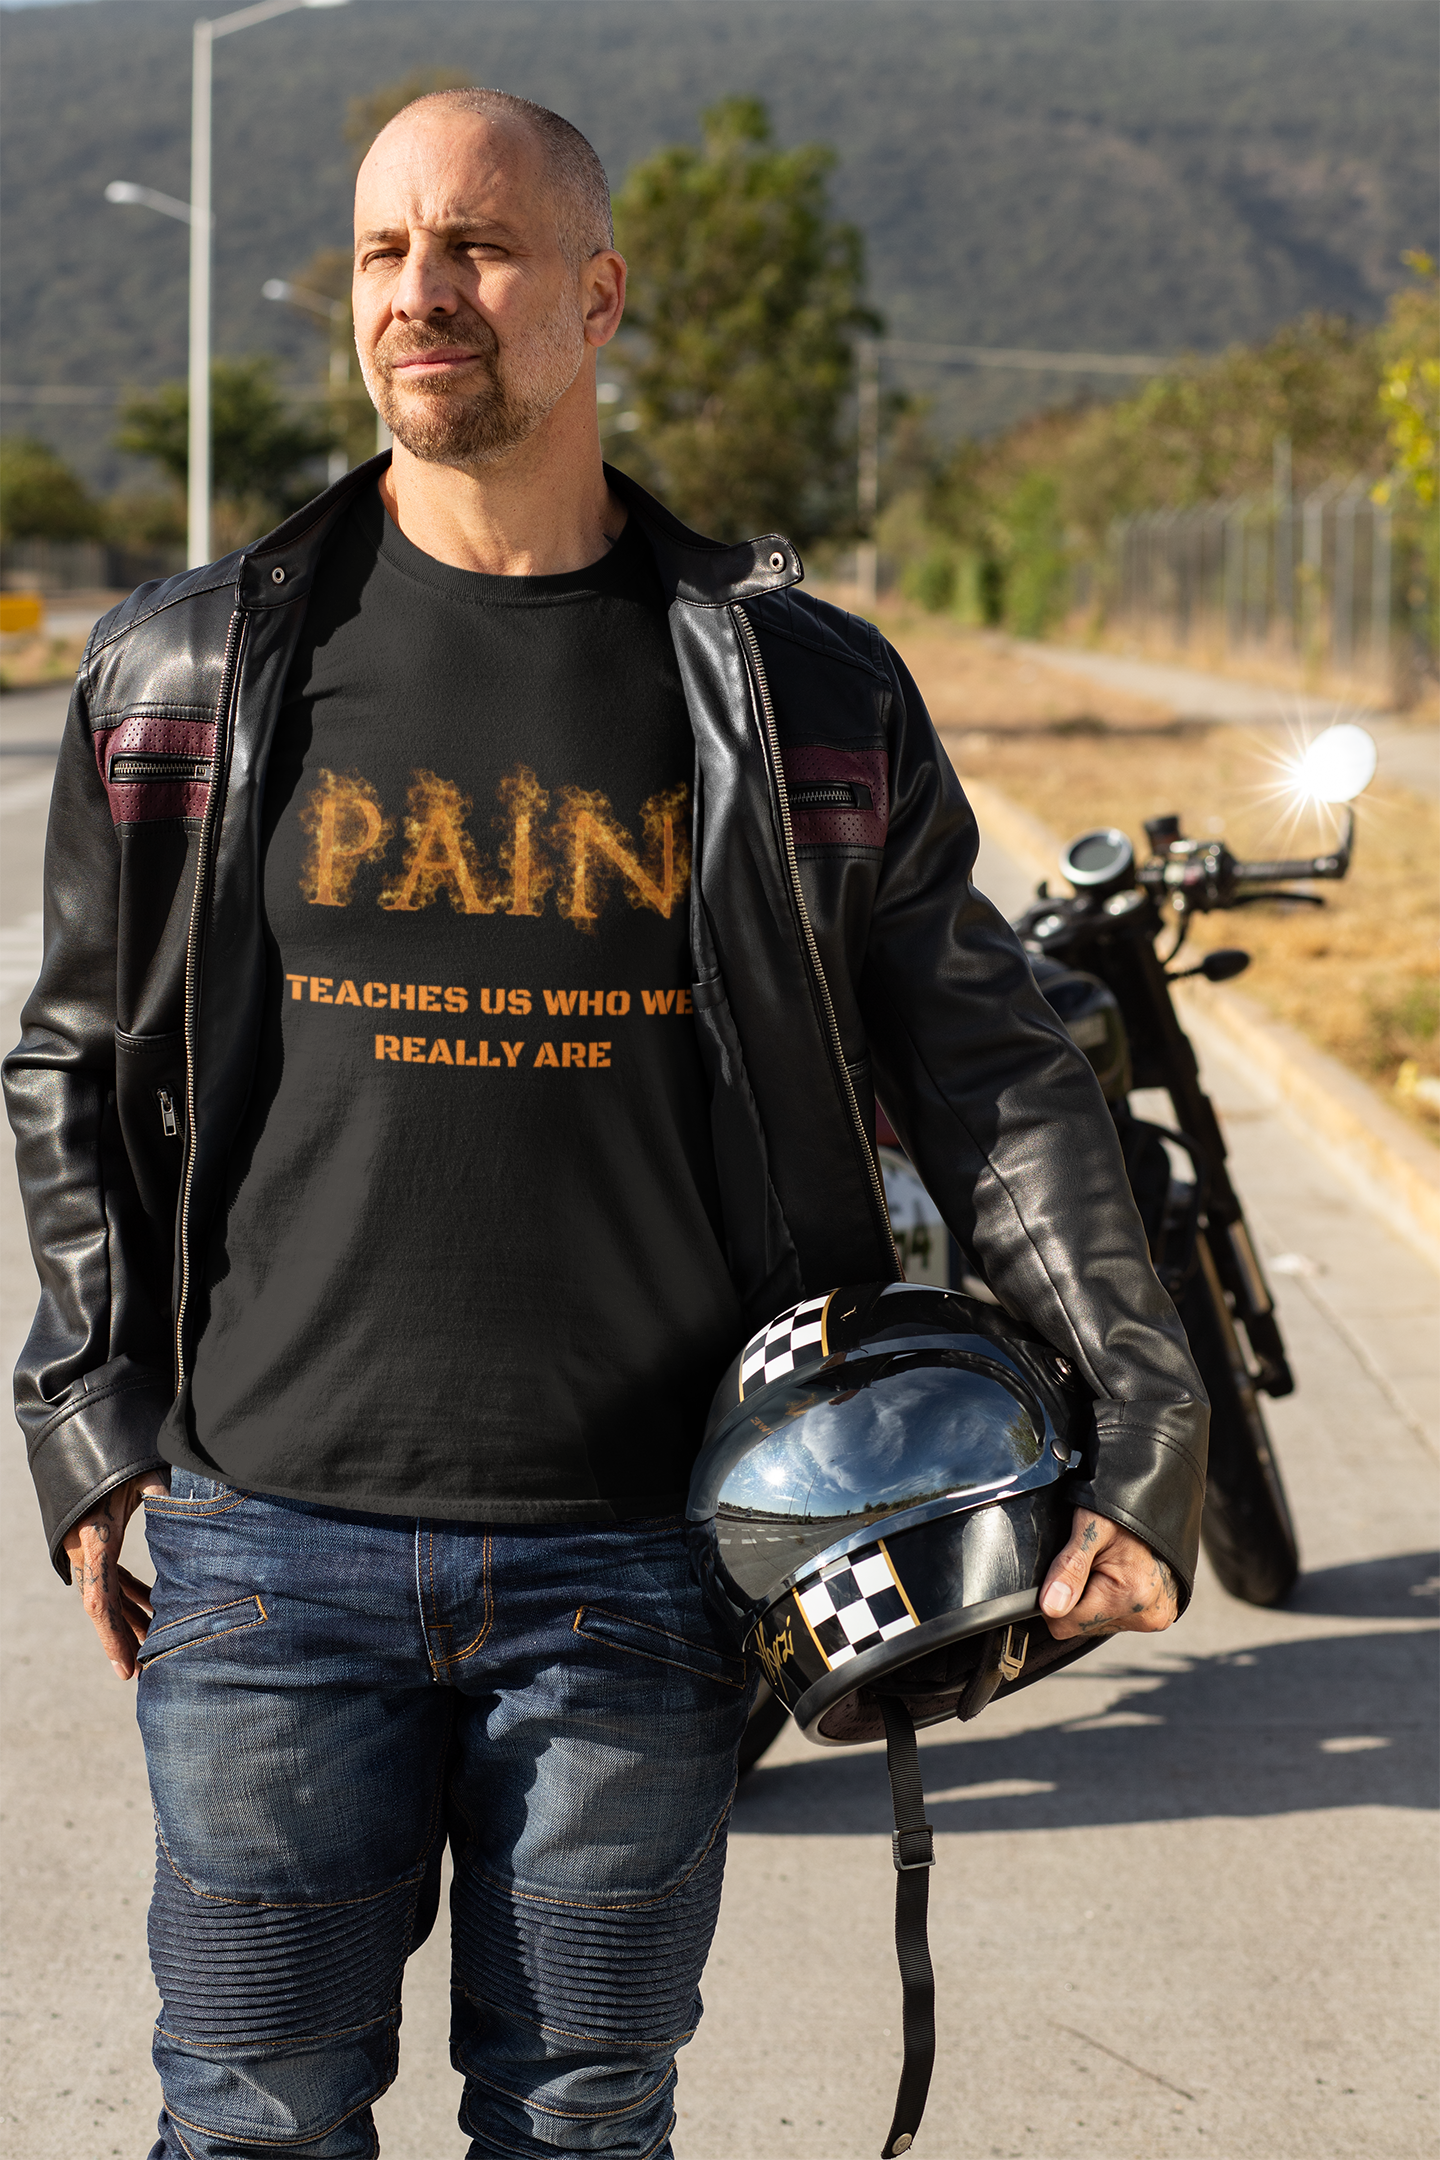 PAIN TEACHES US WHO WE ARE - Short Sleeve T-Shirt